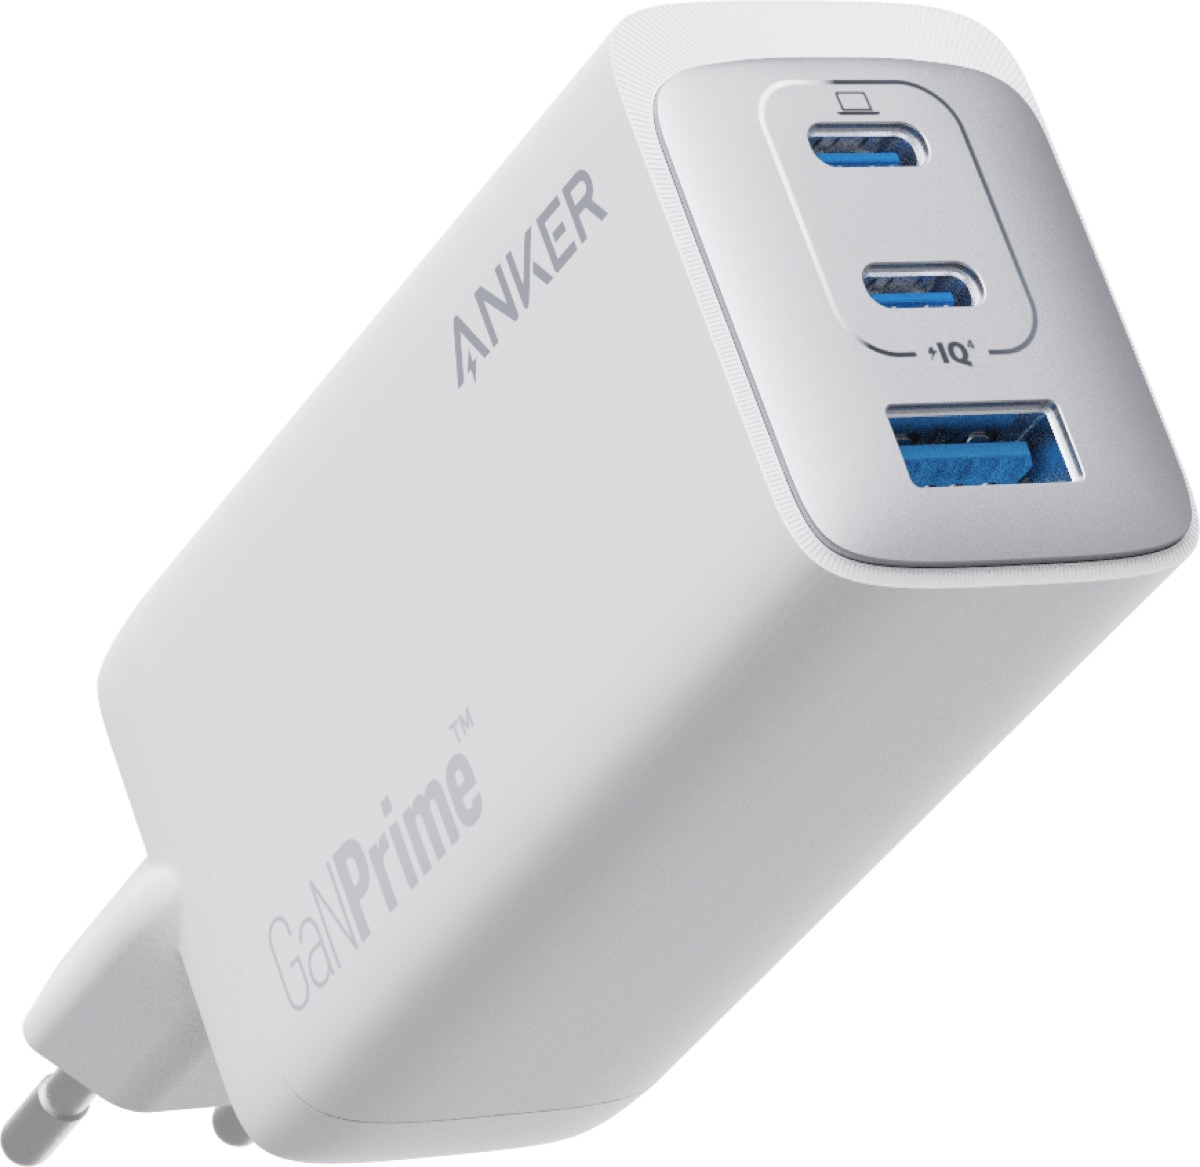 Anker introduces 6 new compact chargers from GaN